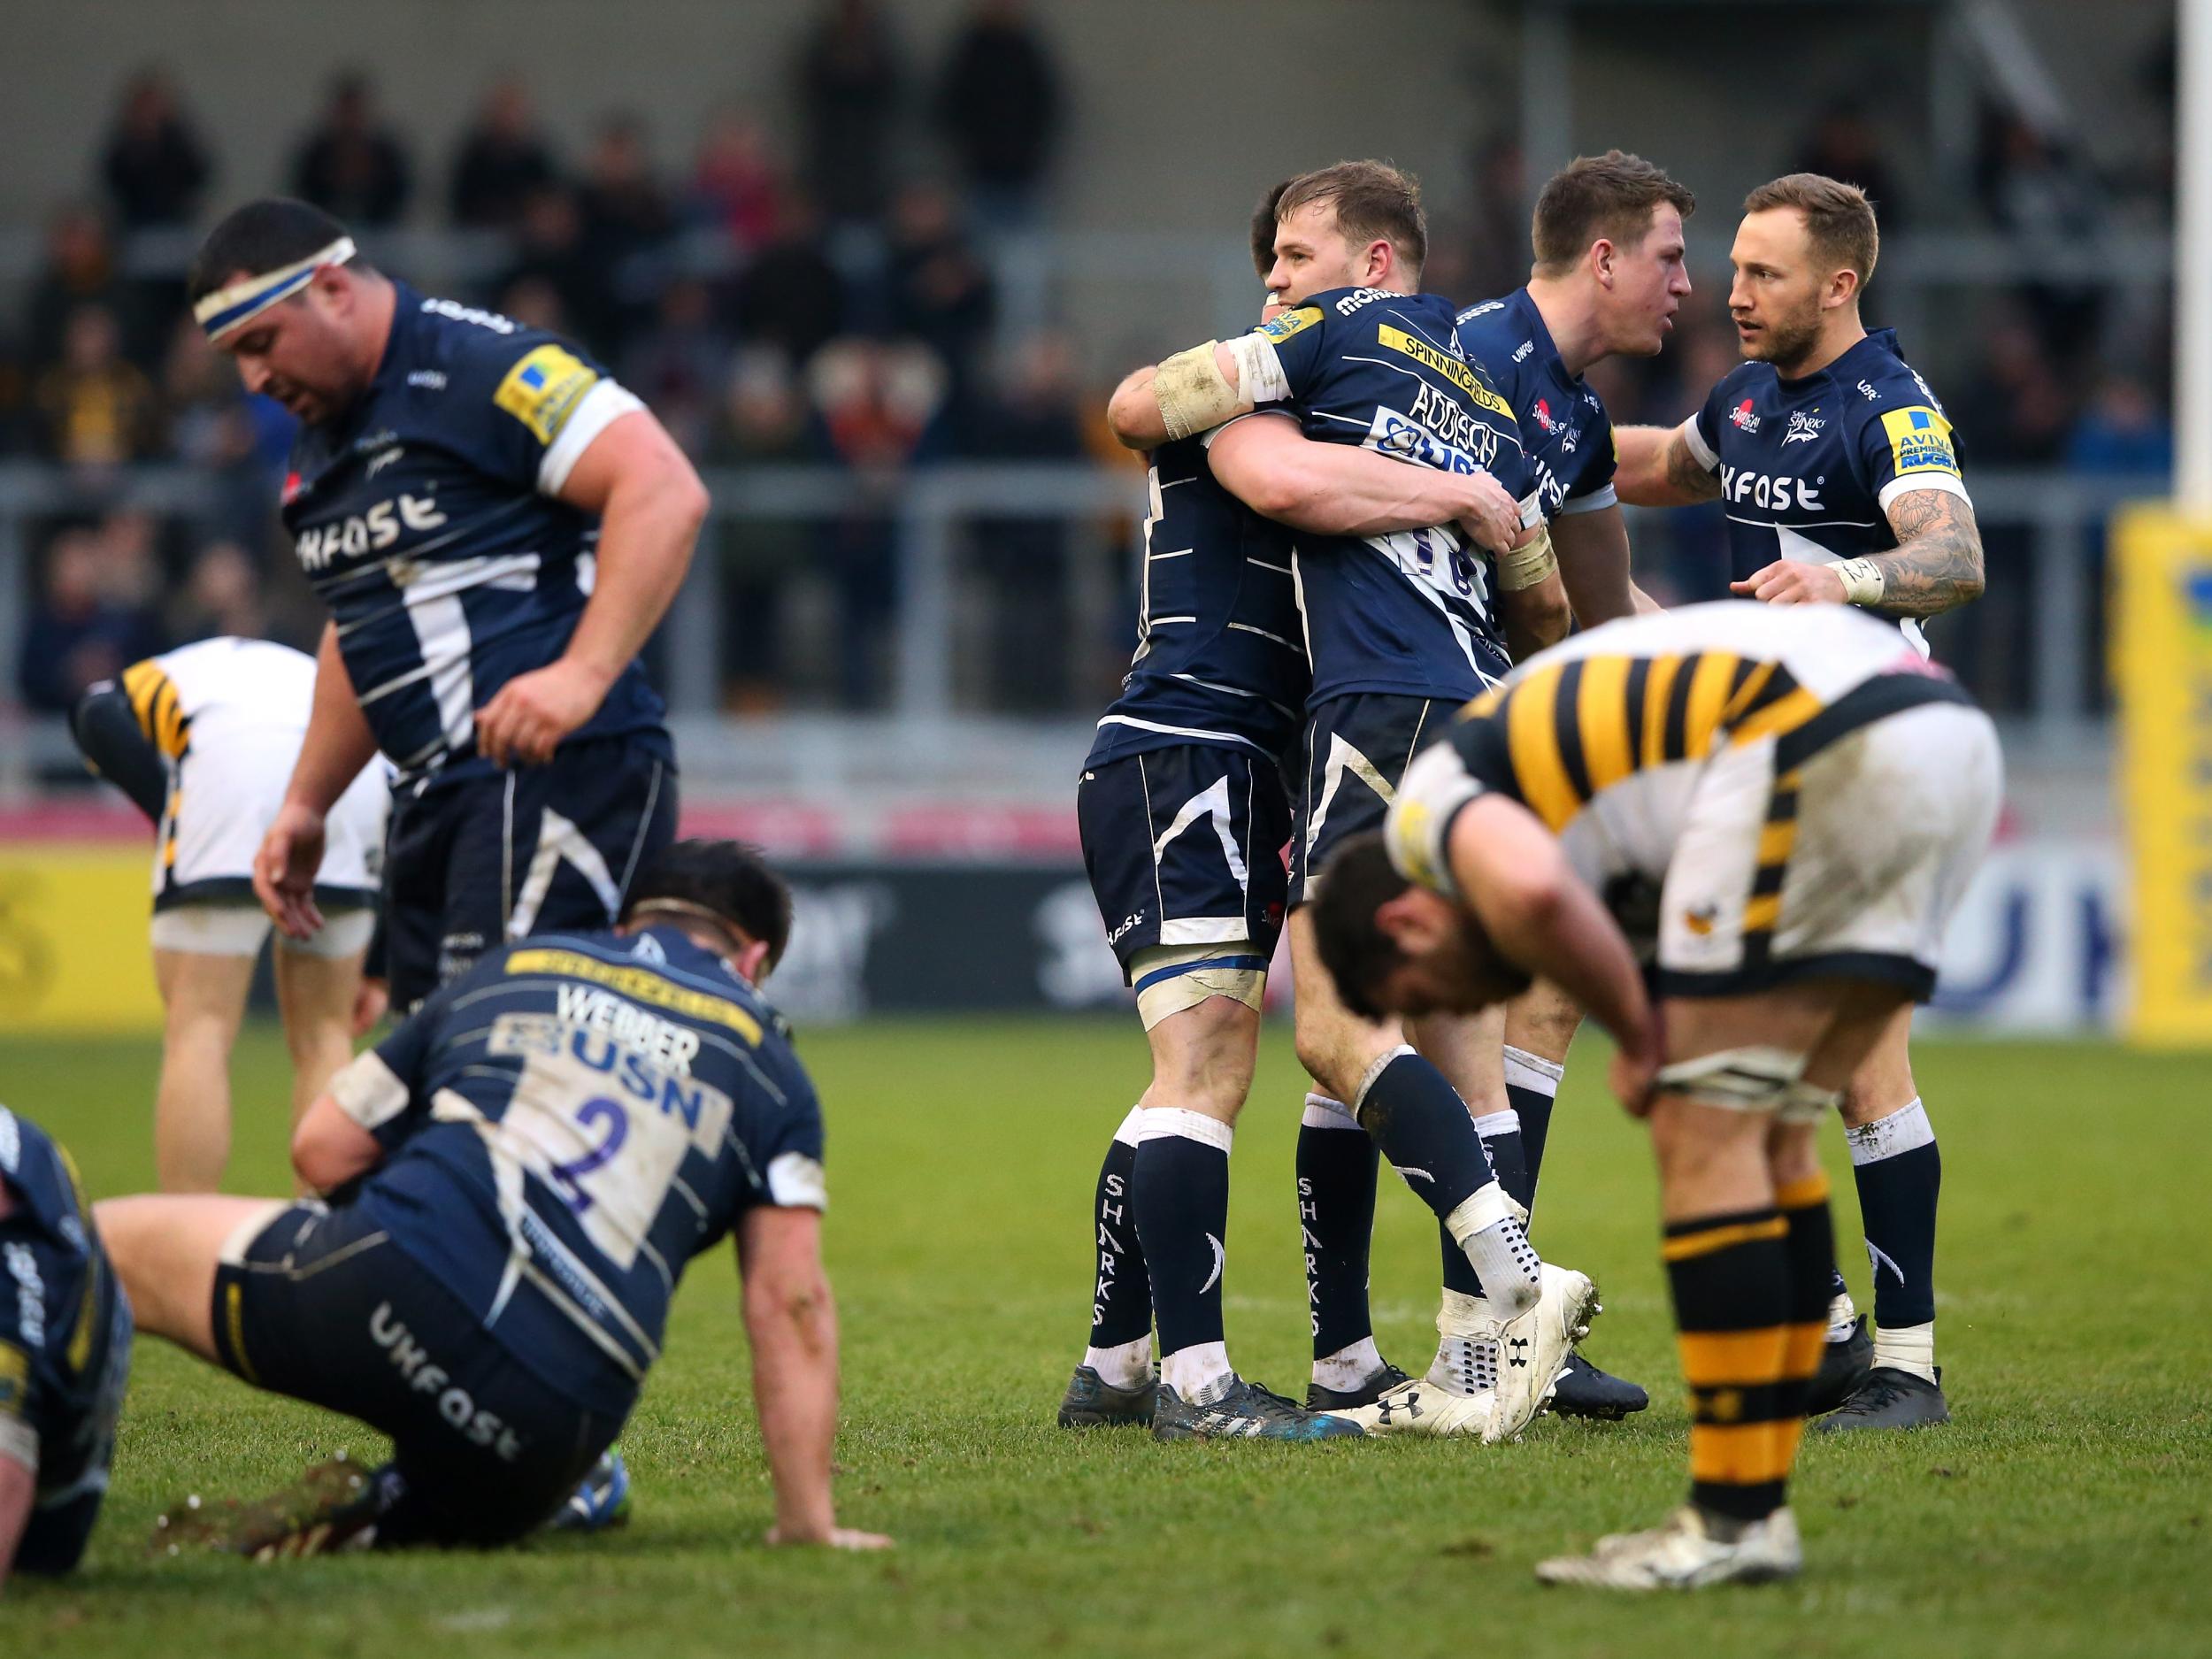 Sale beat Wasps in an exciting match